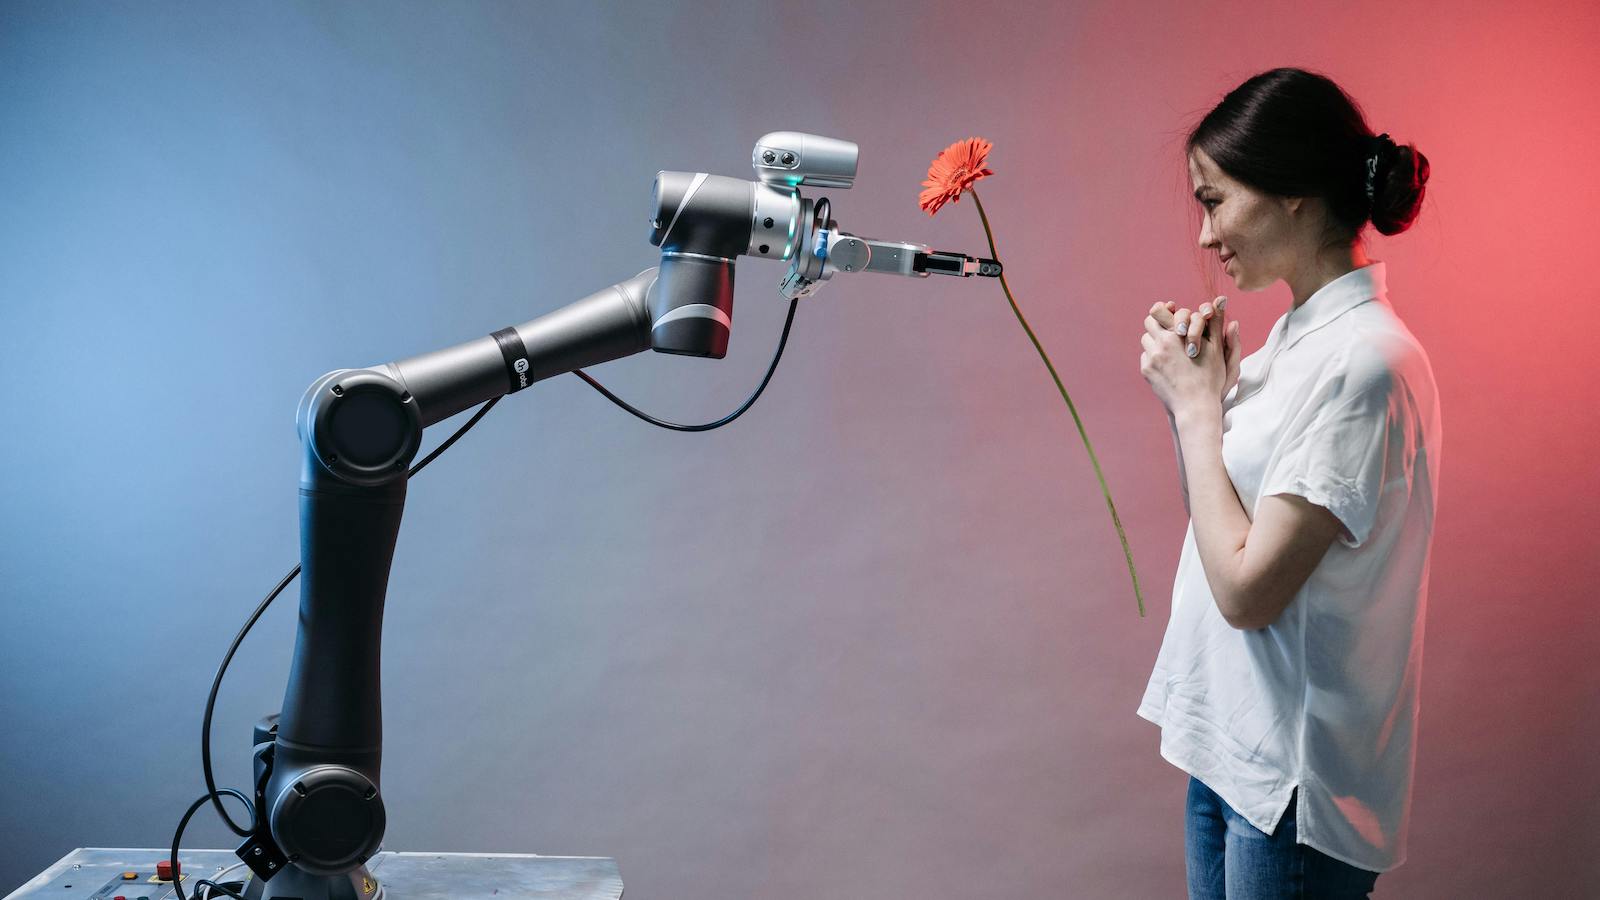 A Robot Holding a Flower giving it to a woman